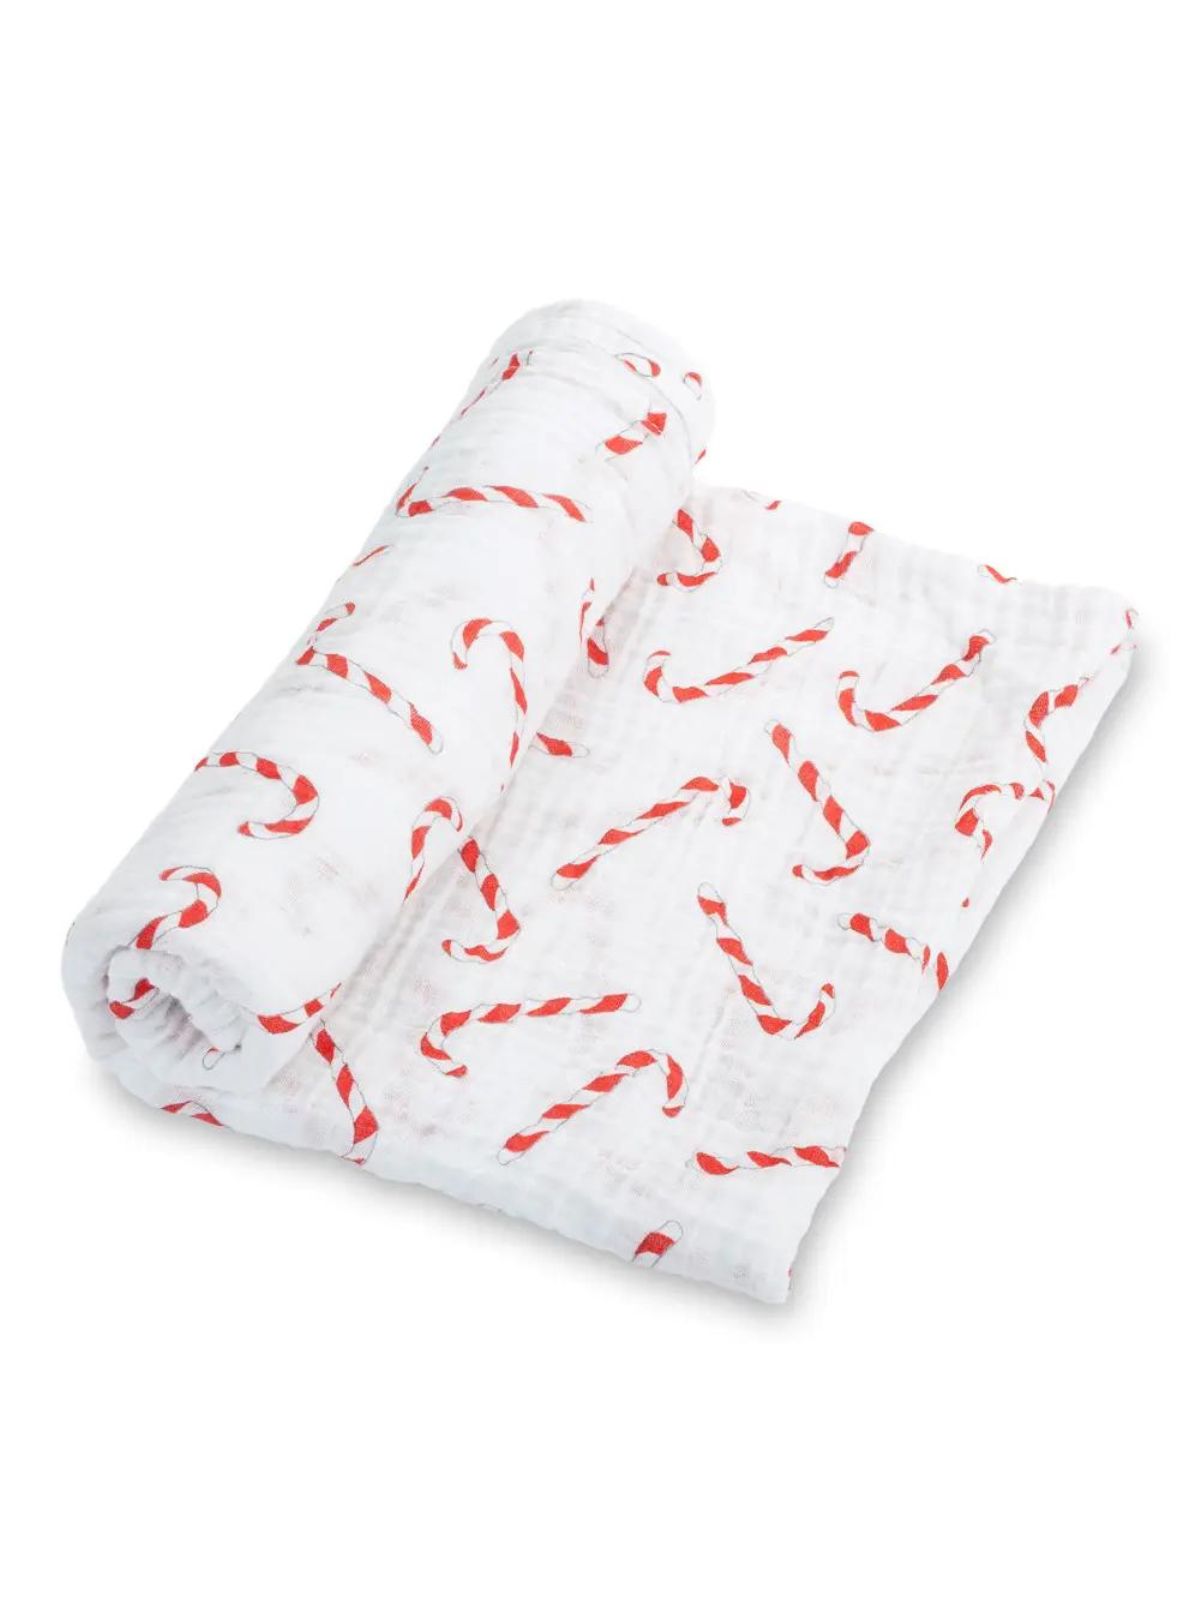 Baby Muslin Cotton Blanket - Candy Cane